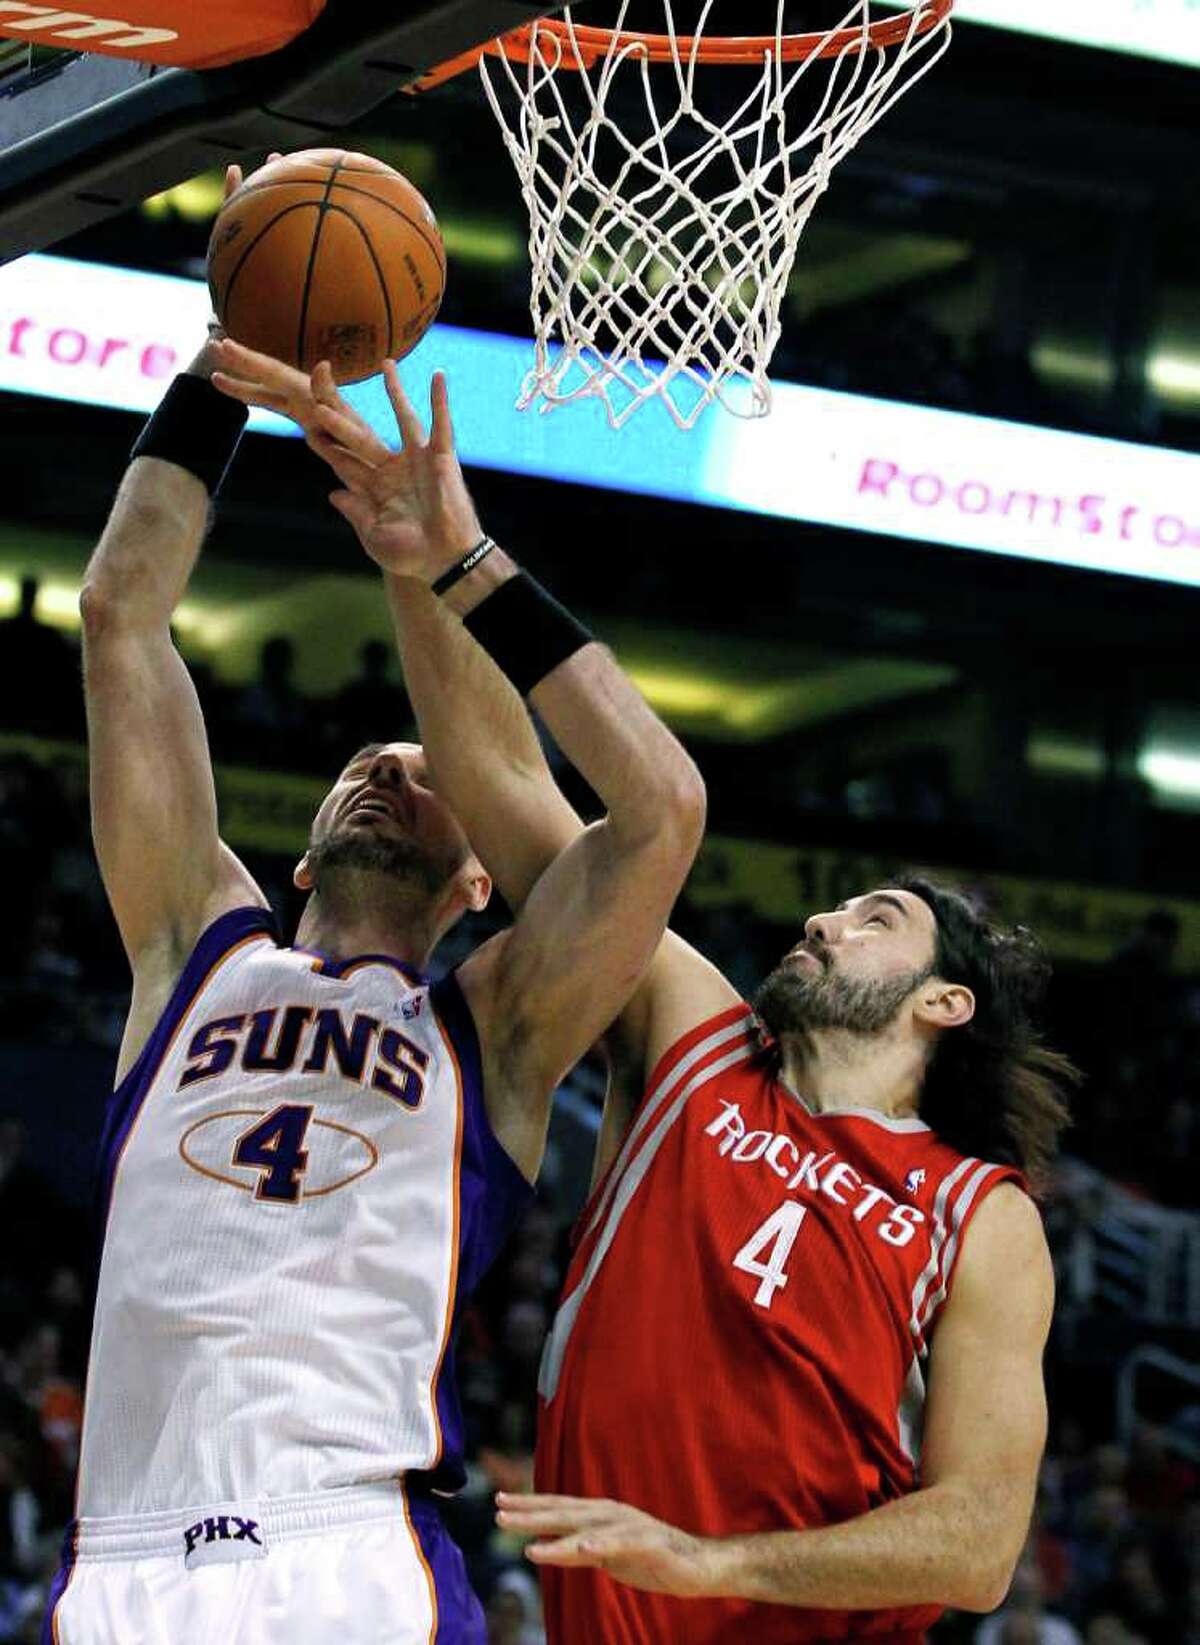 Phoenix Suns' Marcin Gortat, left, of Poland, gets fouled by Houston Rockets' Luis Scola, of Argentina, as he goes up for a shot during the first quarter in an NBA basketball game, Sunday, March 18, 2012, in Phoenix. (AP Photo/Ross D. Franklin)